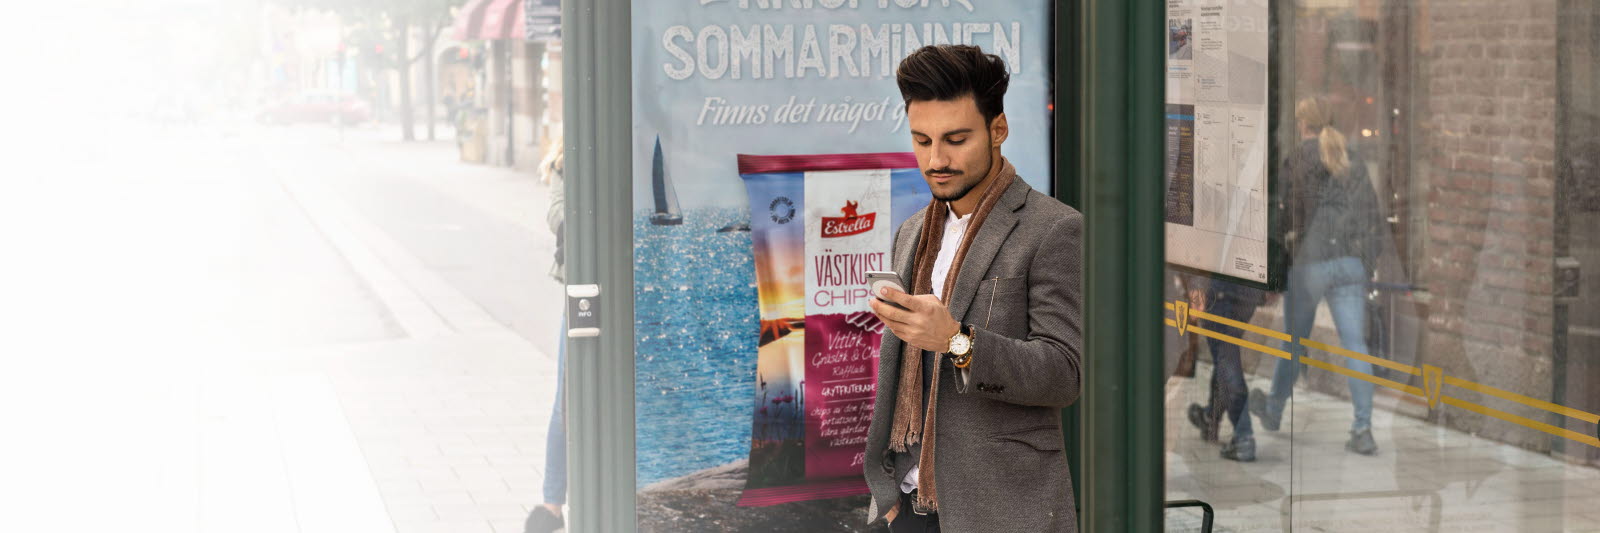 Man looking at mobile phone advertising at a bus stop